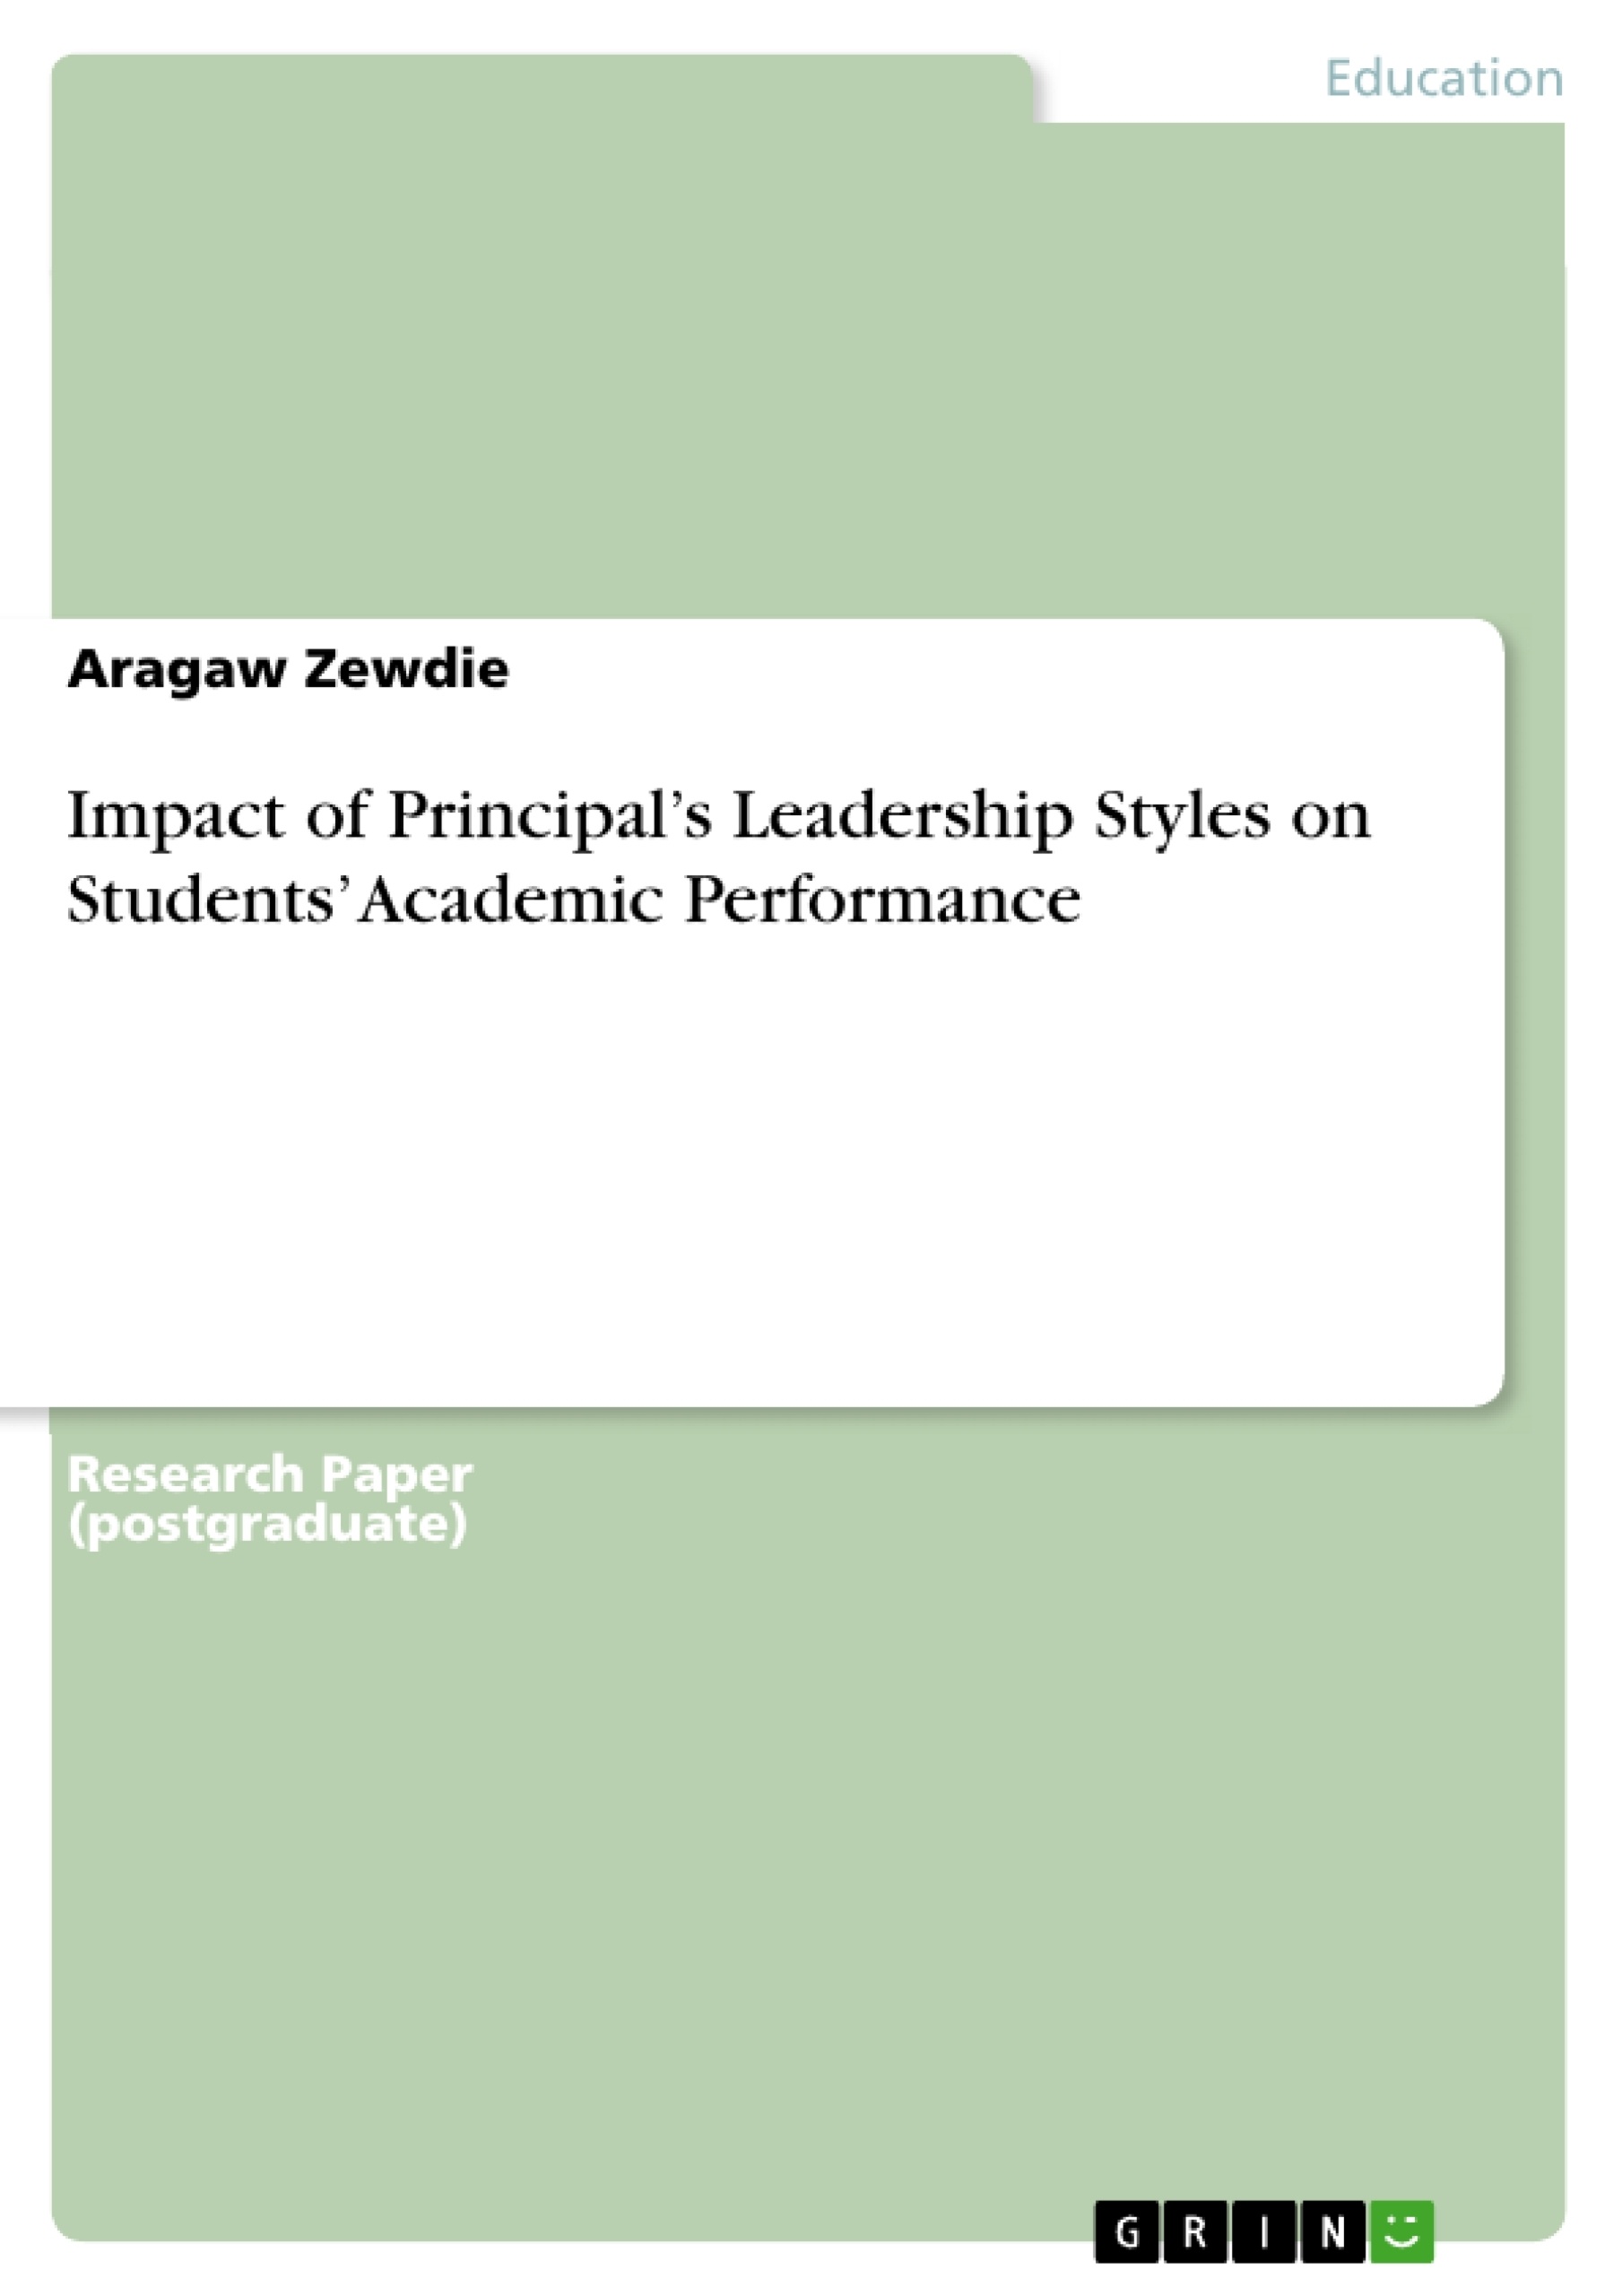 Title: Impact of Principal’s Leadership Styles on Students’ Academic Performance